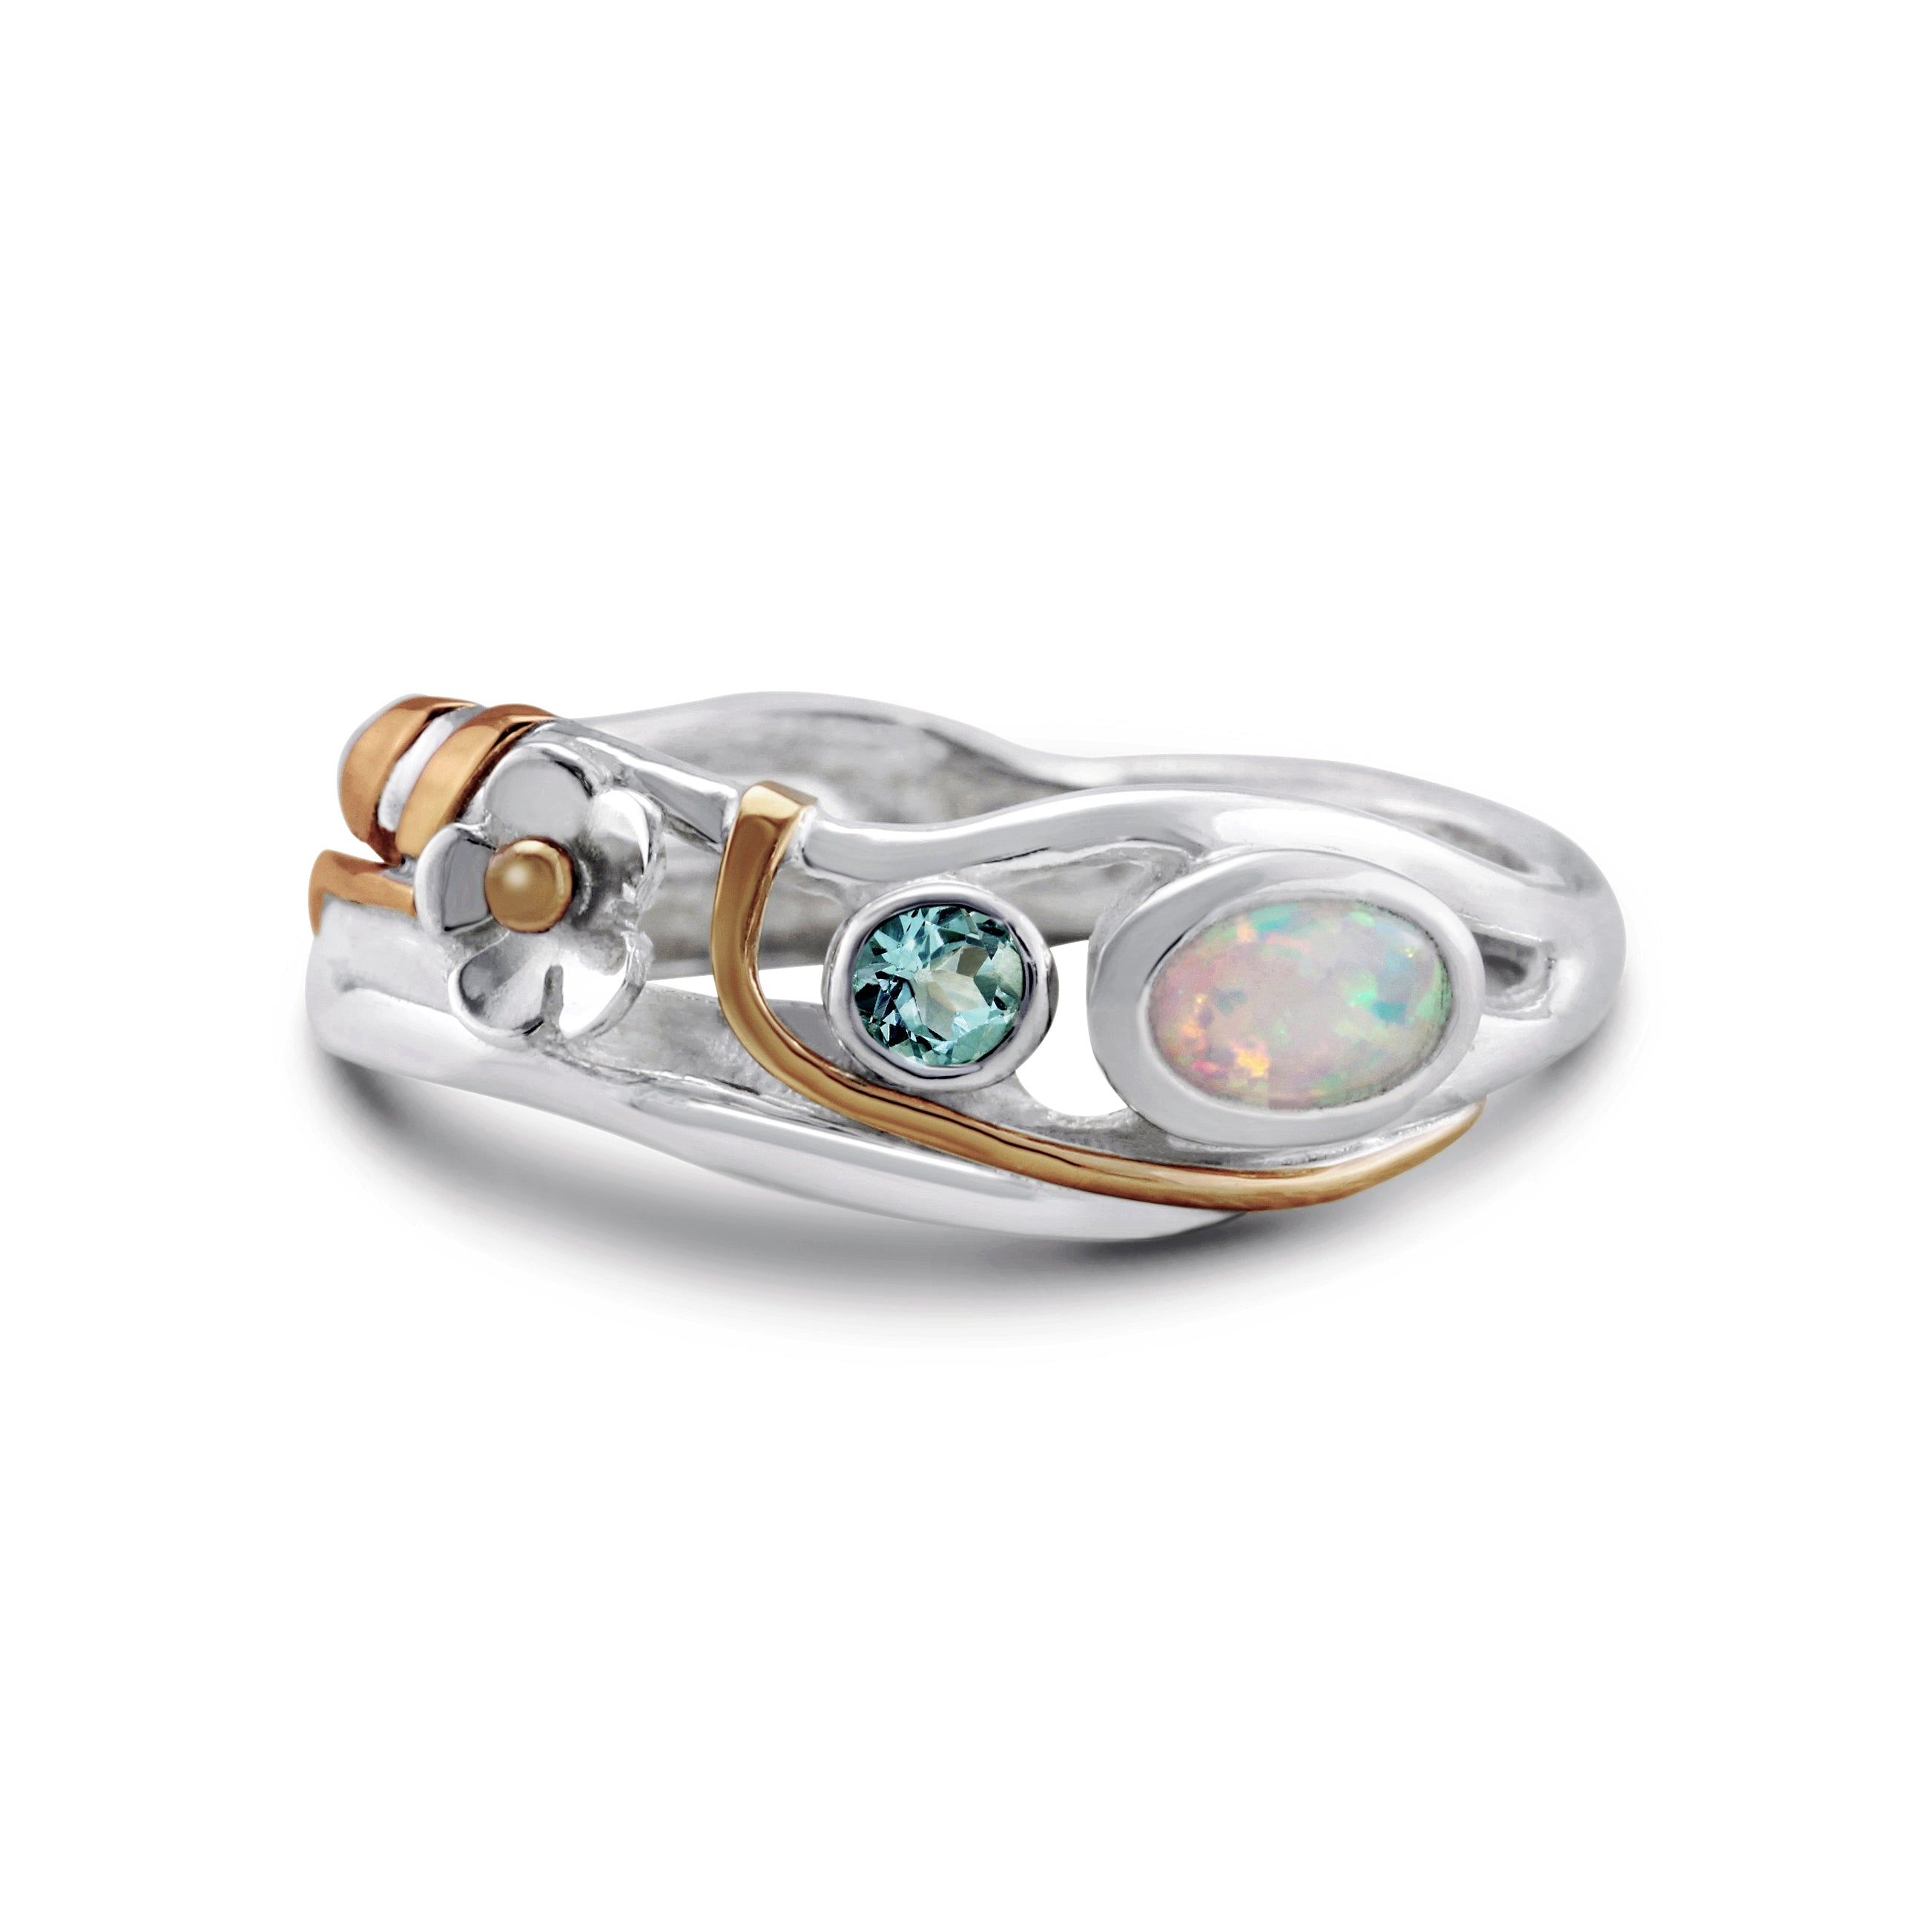 Blue Topaz & Opal Ring in Sterling Silver with Gold Details